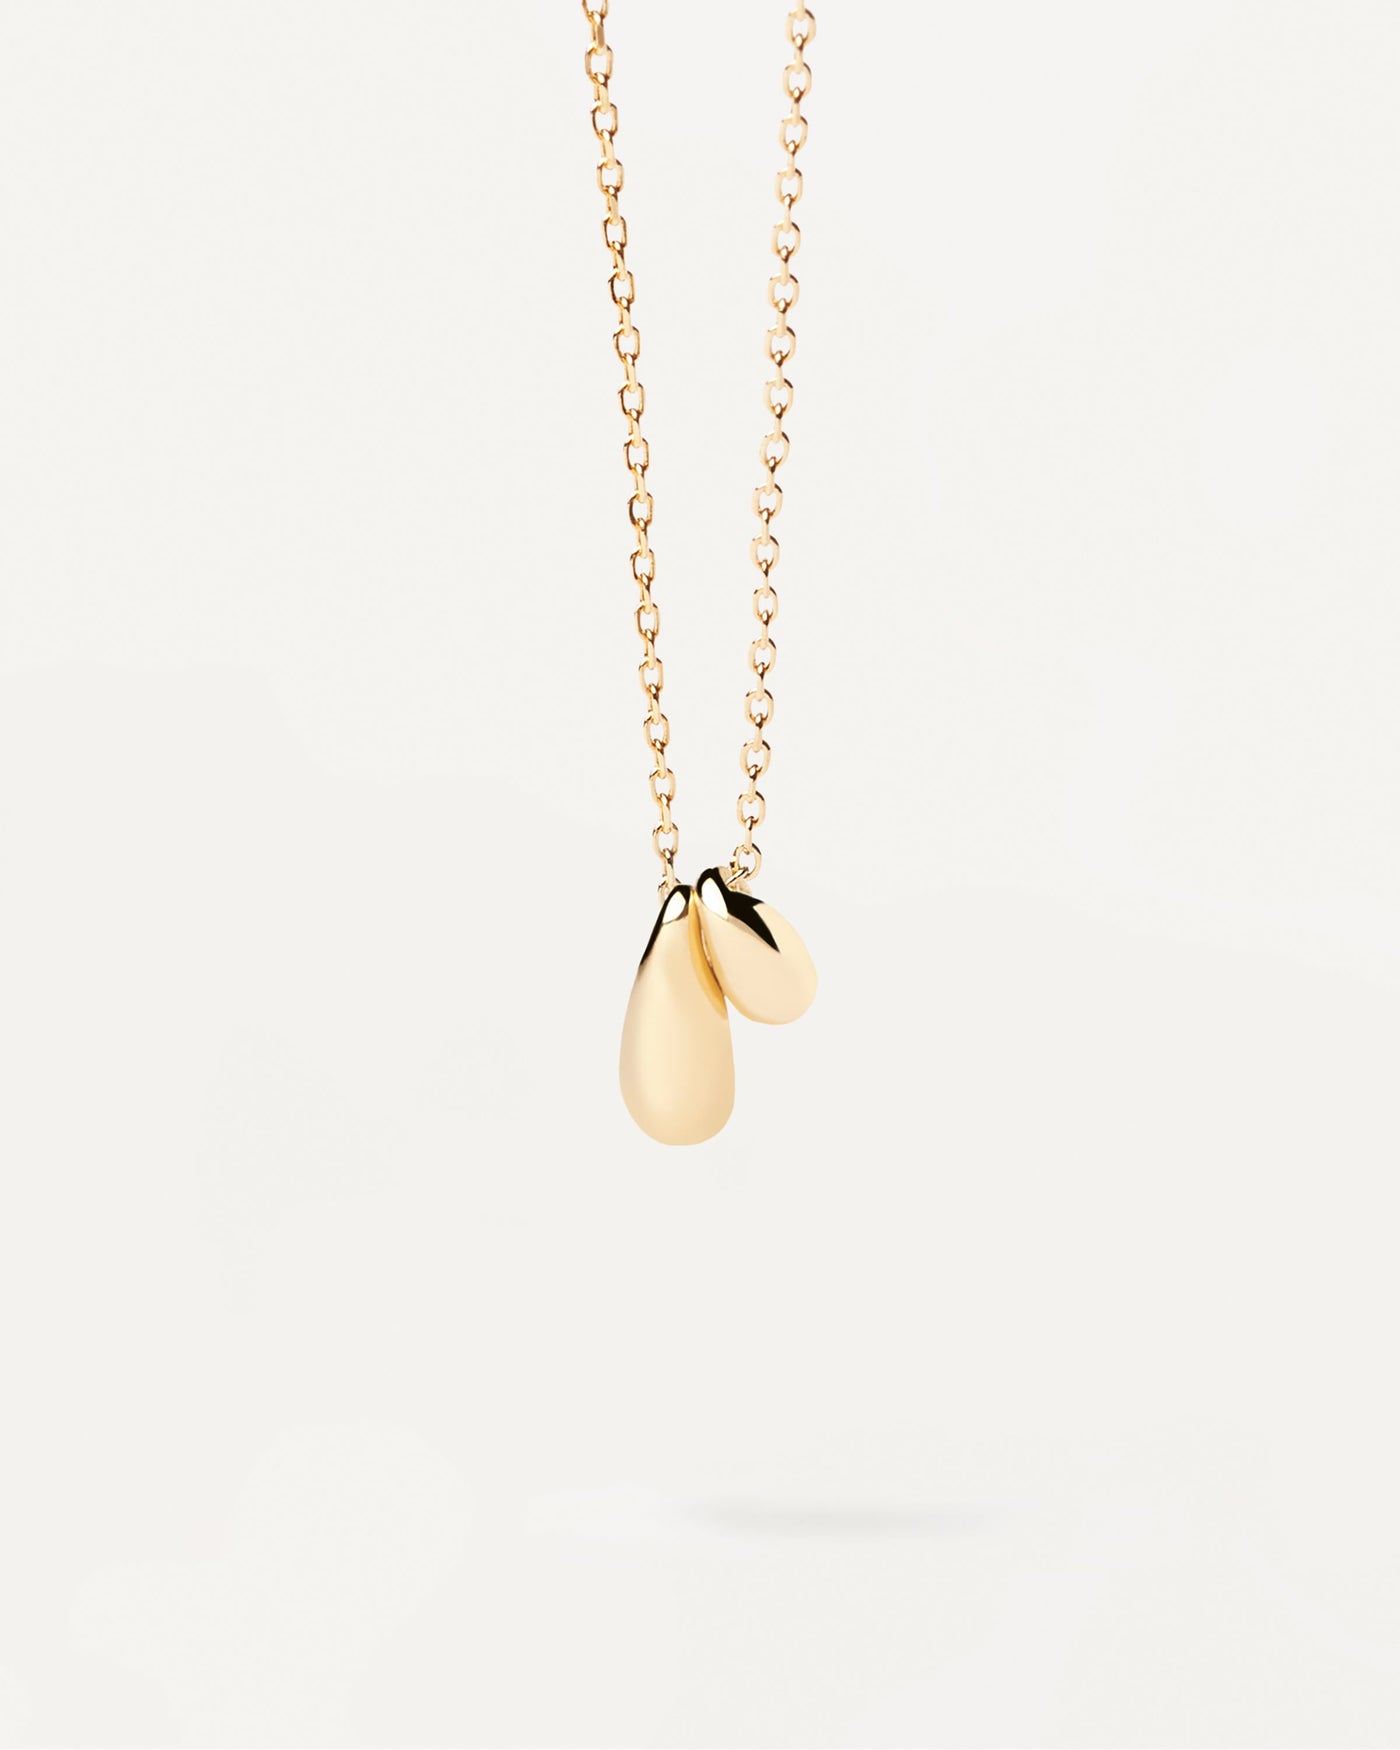 2023 Selection | Sugar Necklace. Gold-plated silver necklace with two drop pendants. Get the latest arrival from PDPAOLA. Place your order safely and get this Best Seller. Free Shipping.